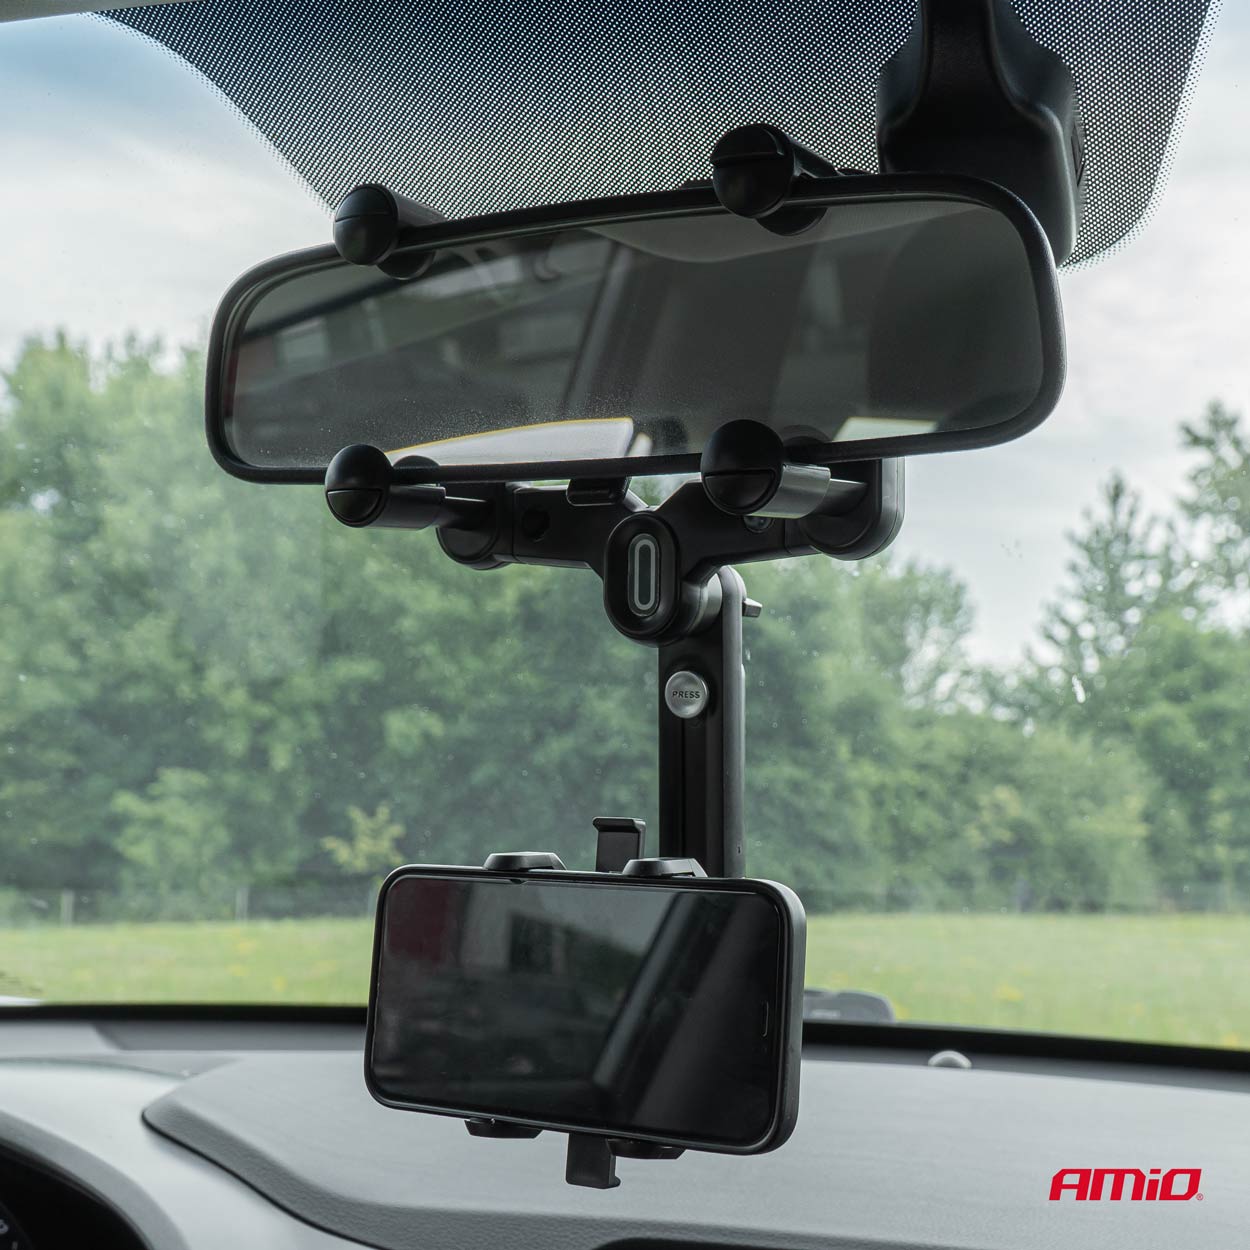 Rearview mirror phone holder HOLD-20 thumb